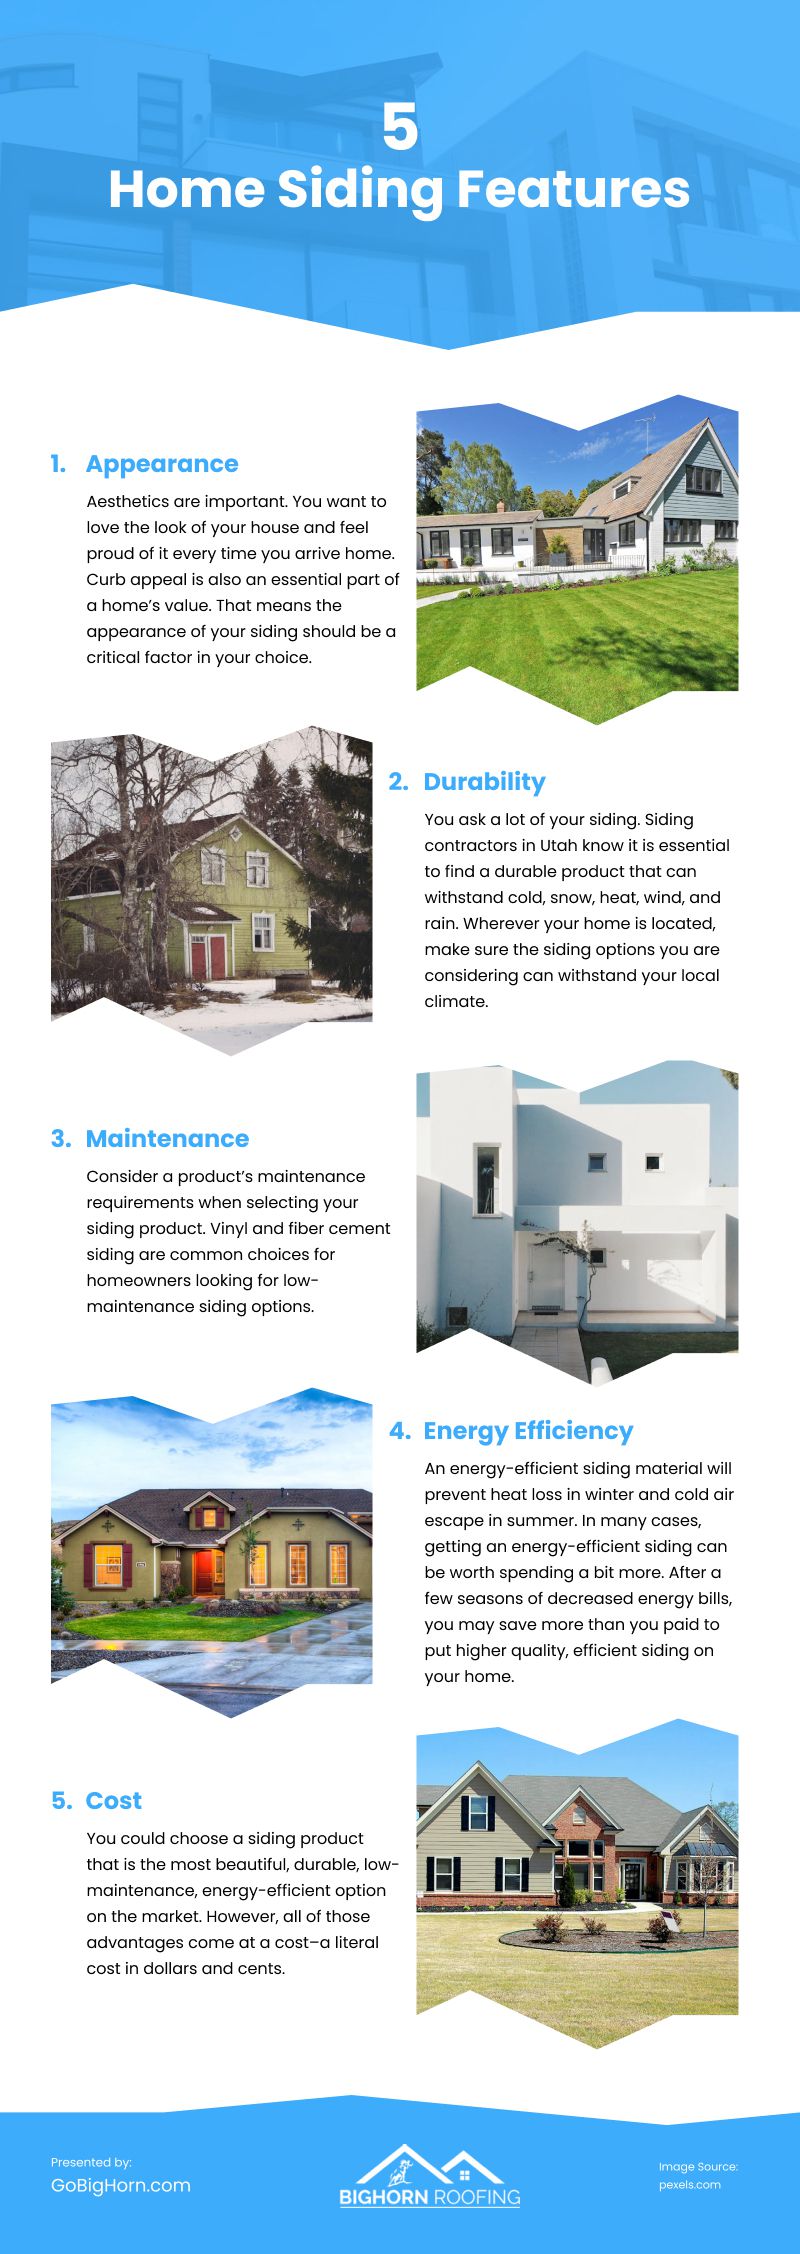 5 Home Siding Features Infographic